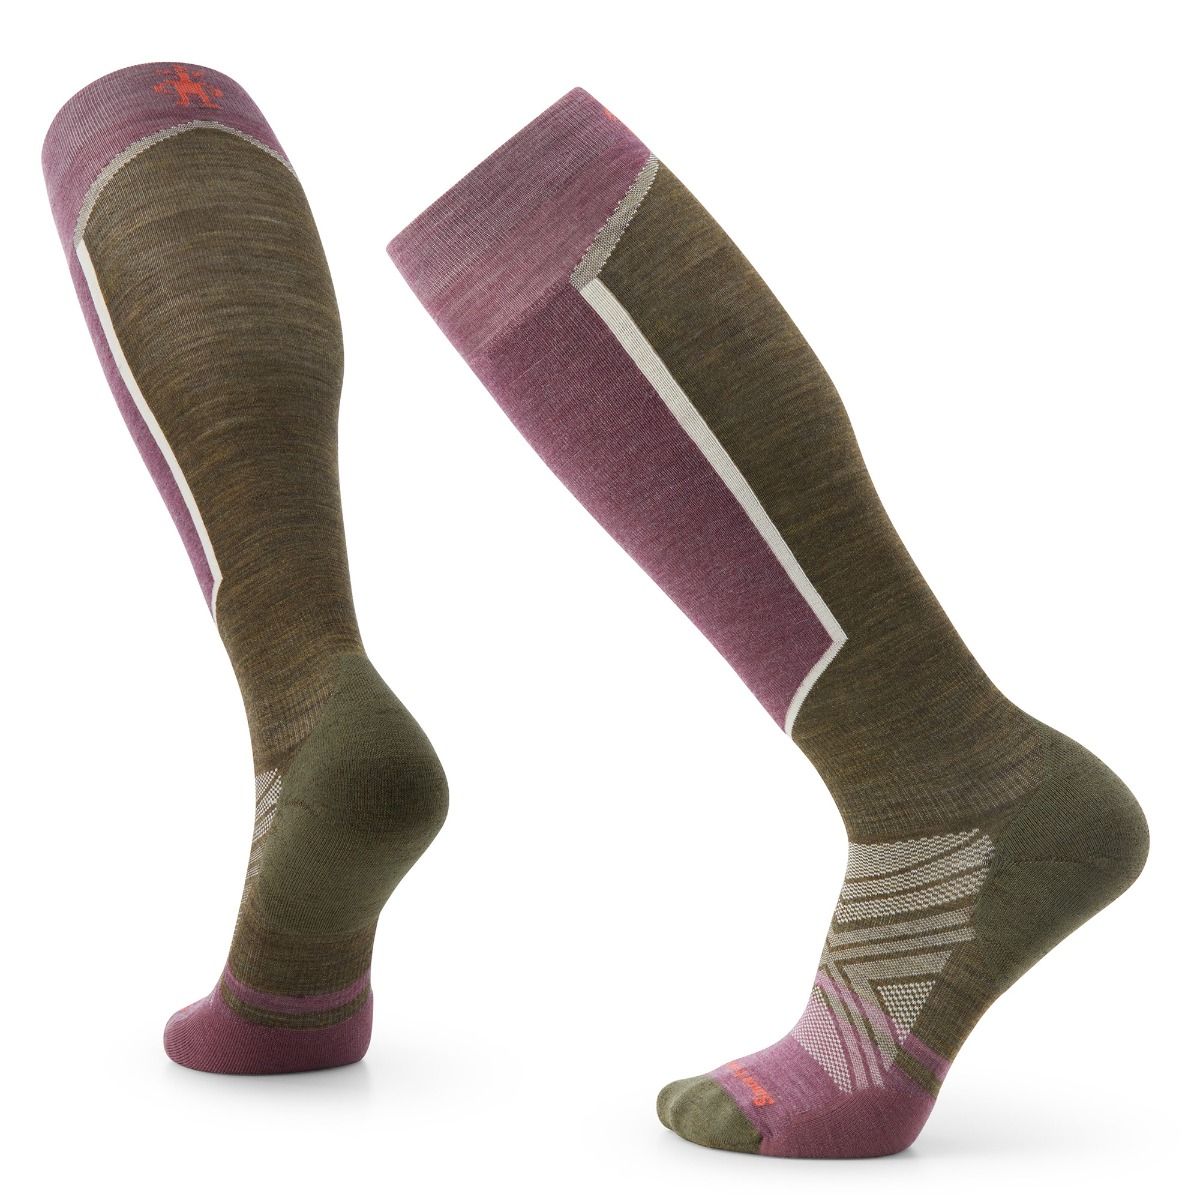 The 10 Best Organic & Sustainable Socks For Cozy, Comfy Feet